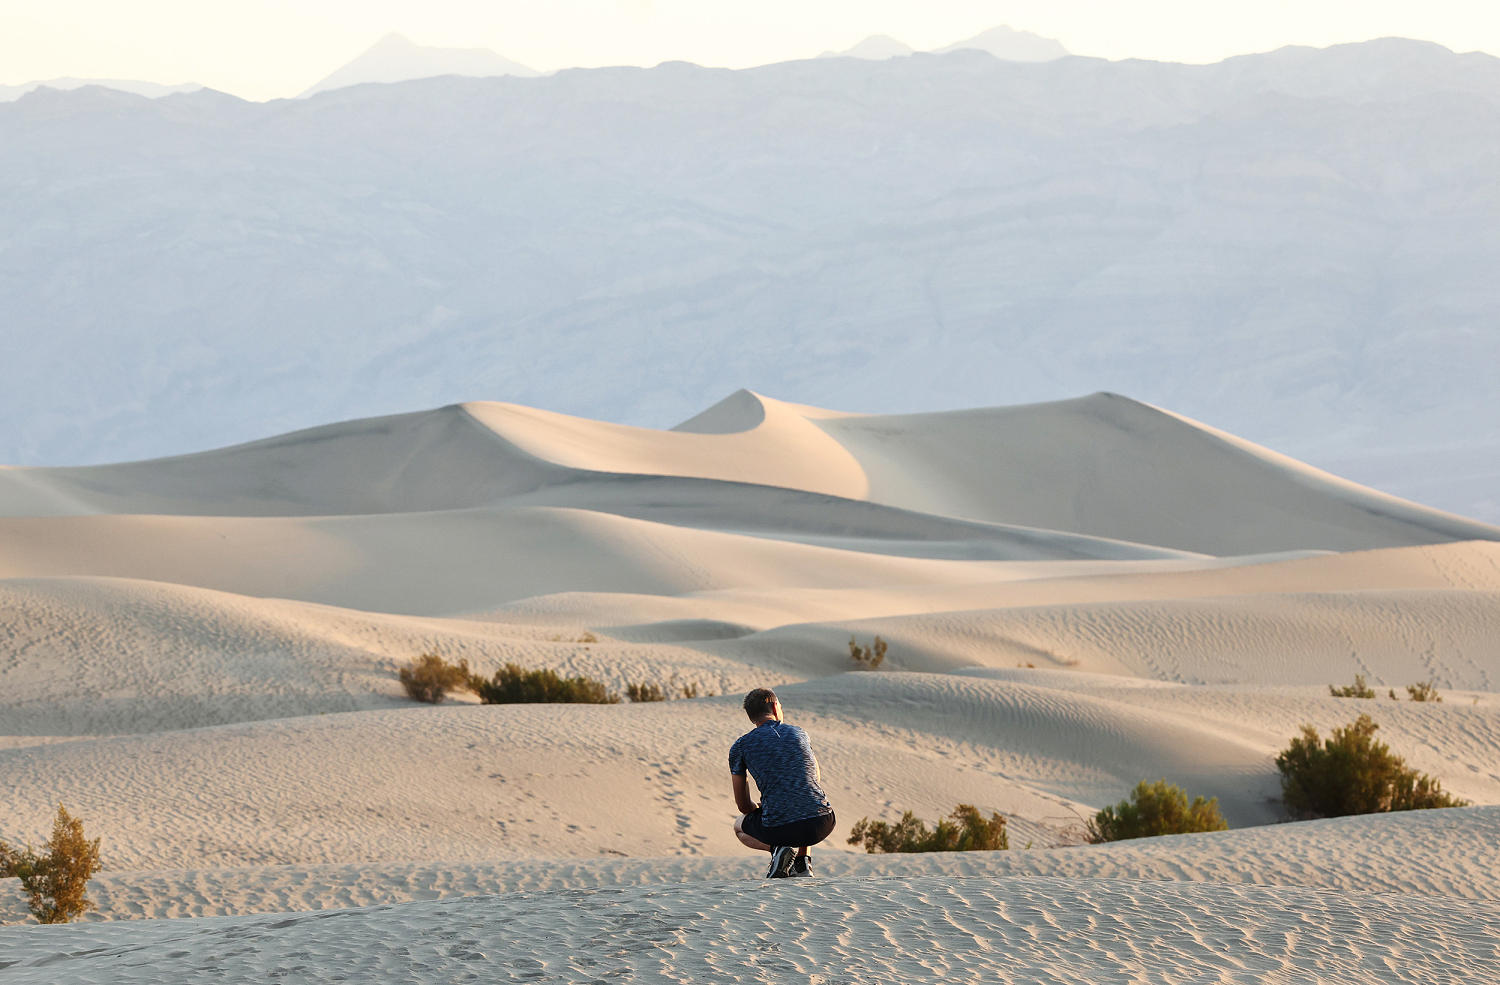 Man hospitalized after burning his feet on blistering sand dunes at Death Valley National Park